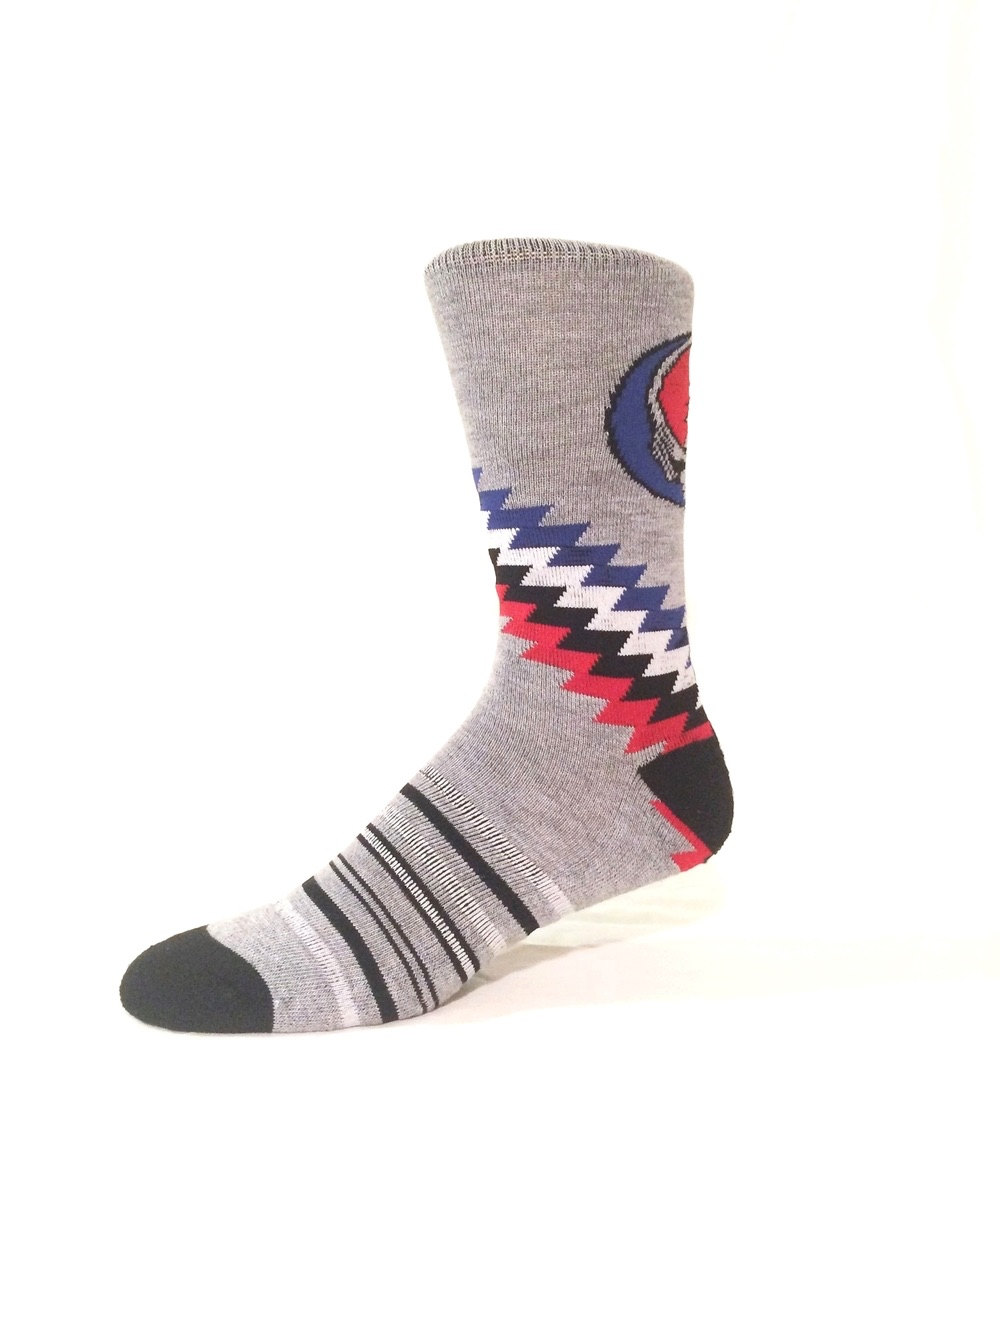 Grateful dead lightning bolt steal your face by YouEnjoyMysocks